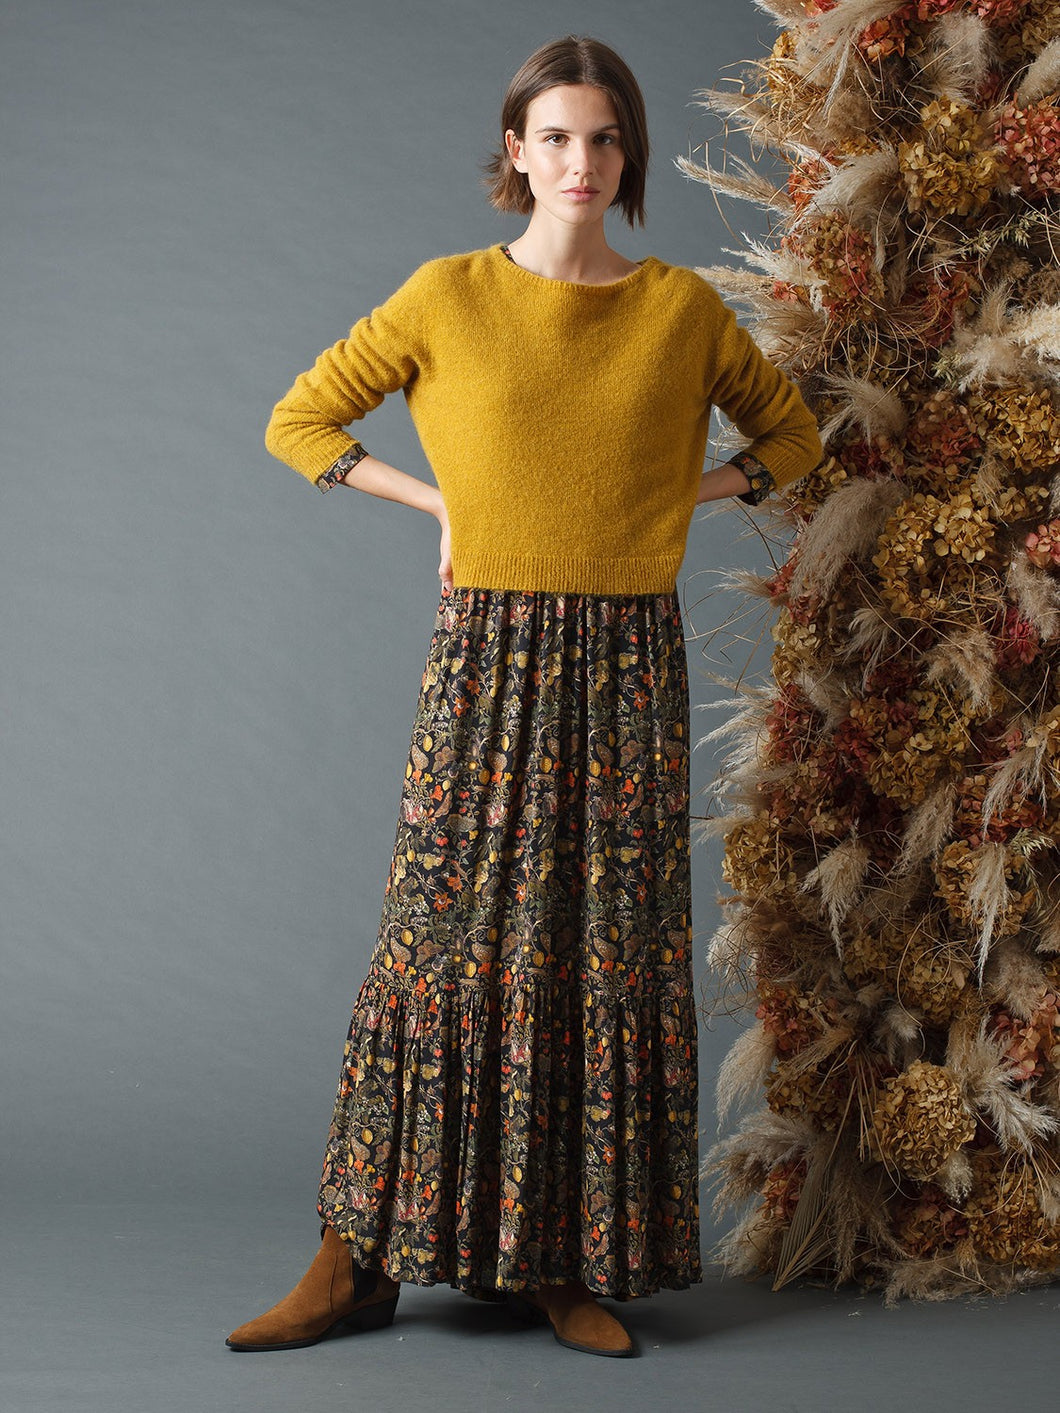 Indi & Cold cropped knit in Mustard